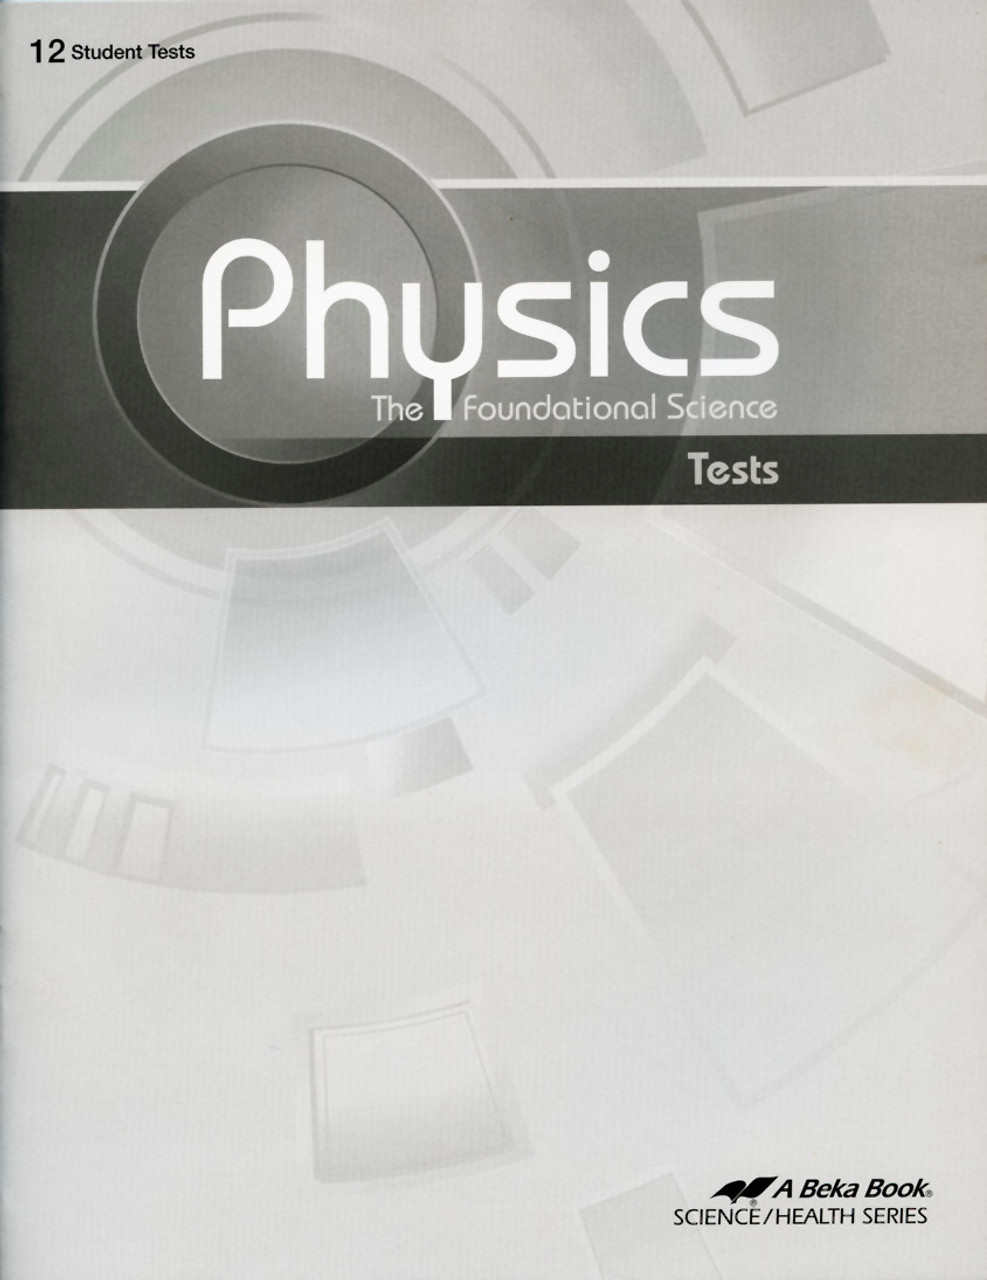 Physics: The Foundational Science, 2nd edition - Tests